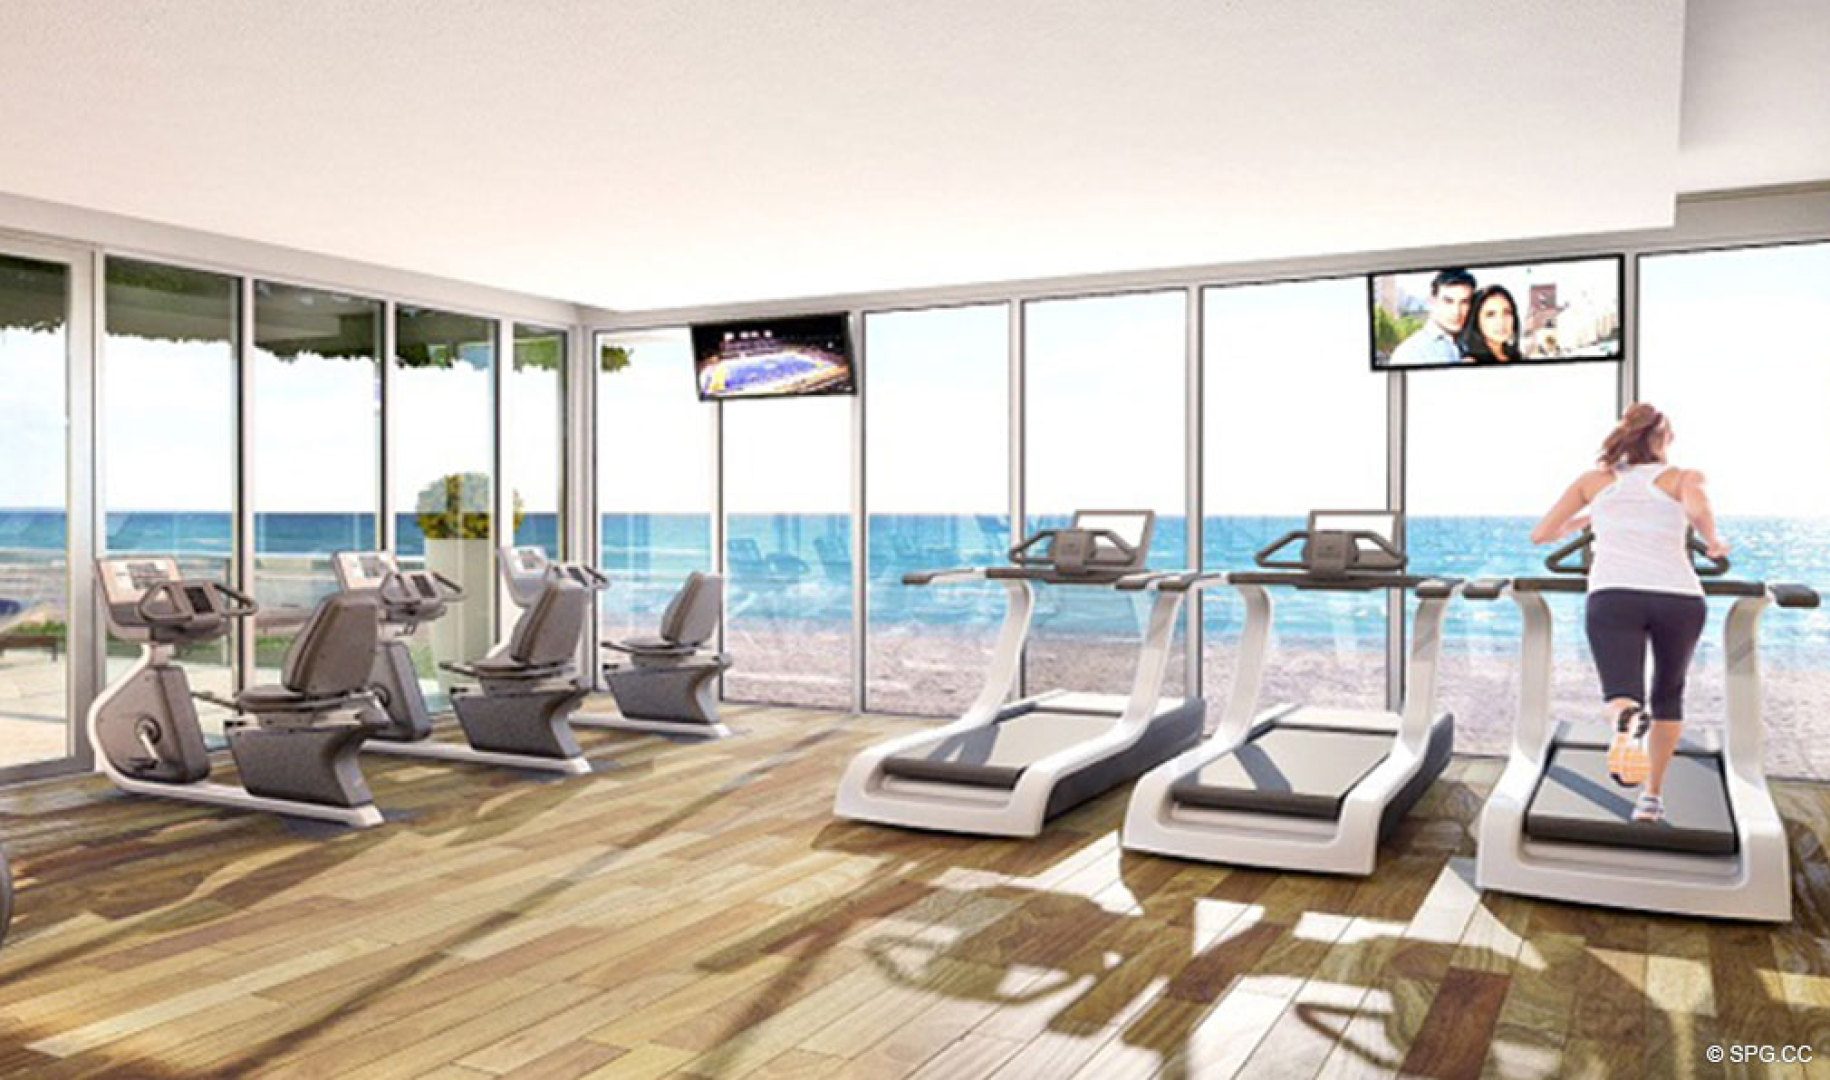 State of the Art Fitness Center at Sage Beach, Luxury Oceanfront Condos in Hollywood Beach Florida 33019